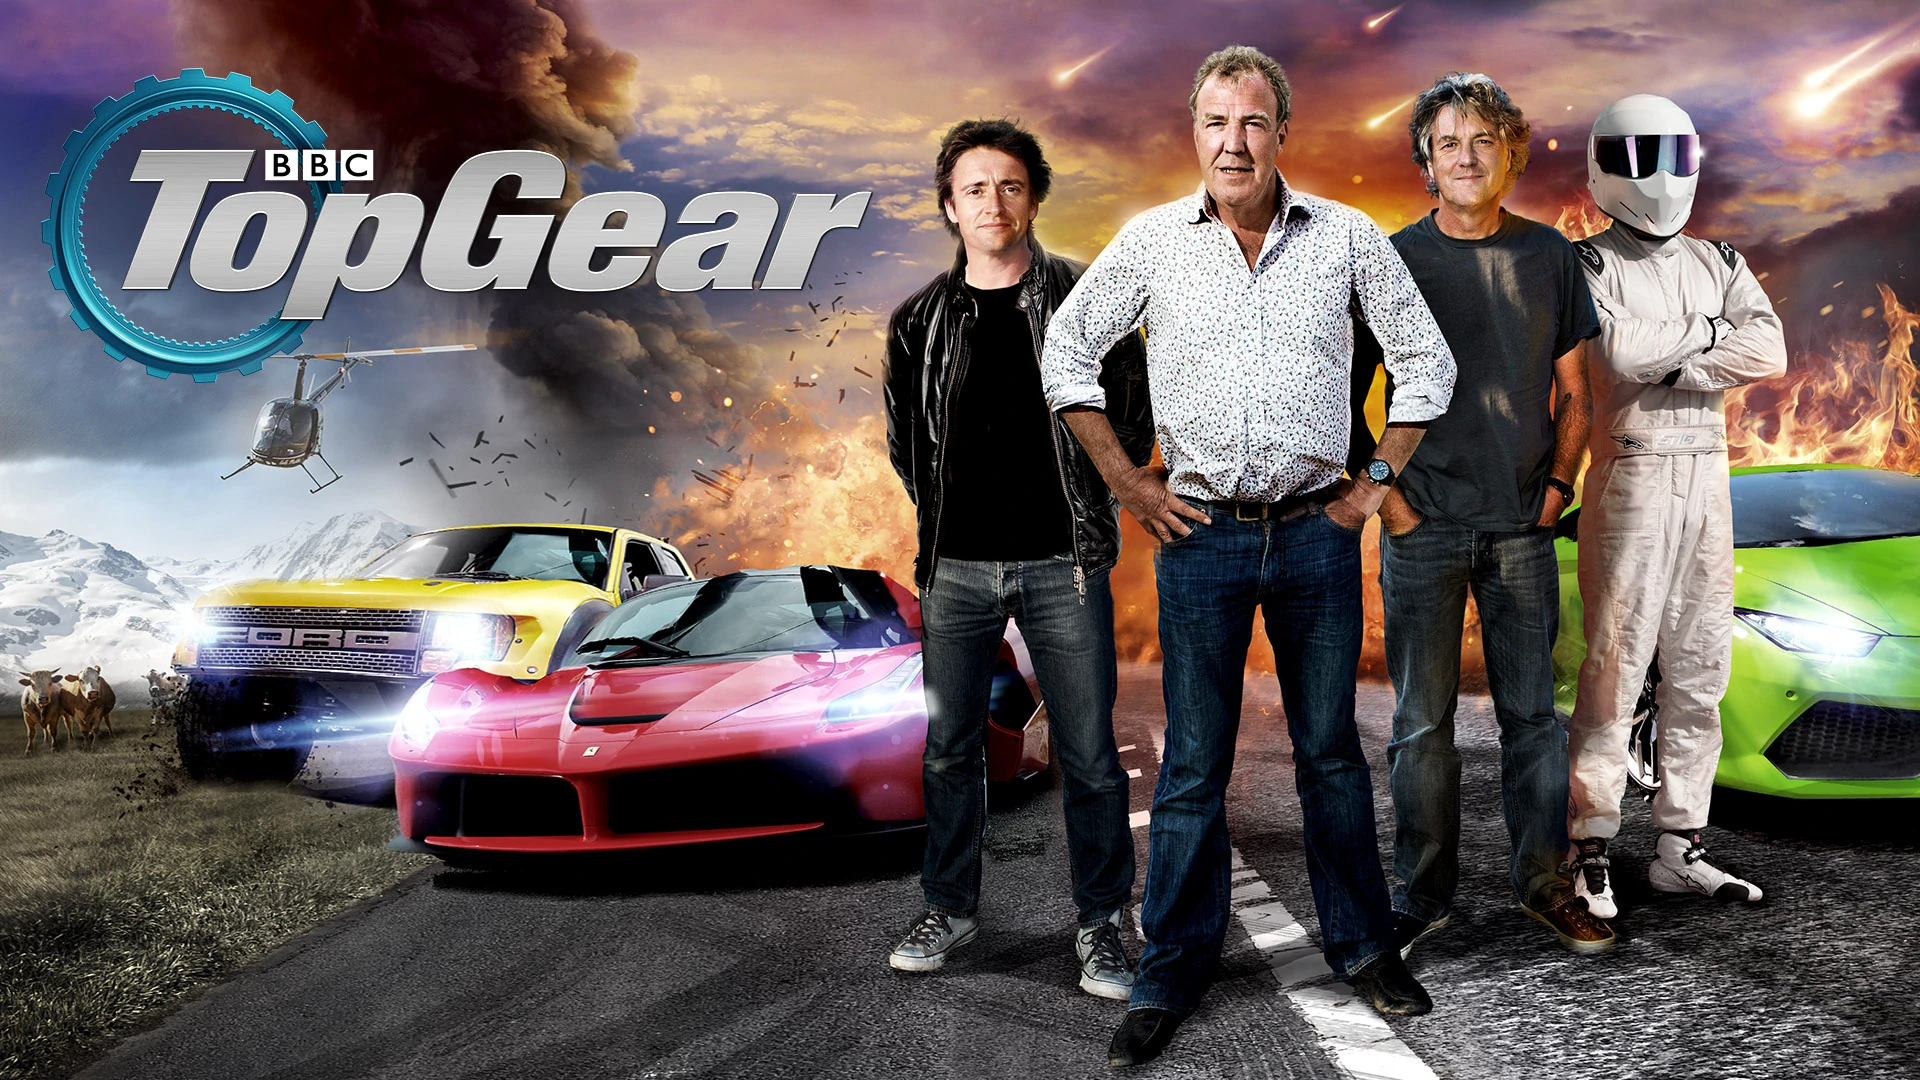 The Watch Jeremy Clarkson's Top Gear Outside of the UK on a Strict Budget | Grand Tour Nation